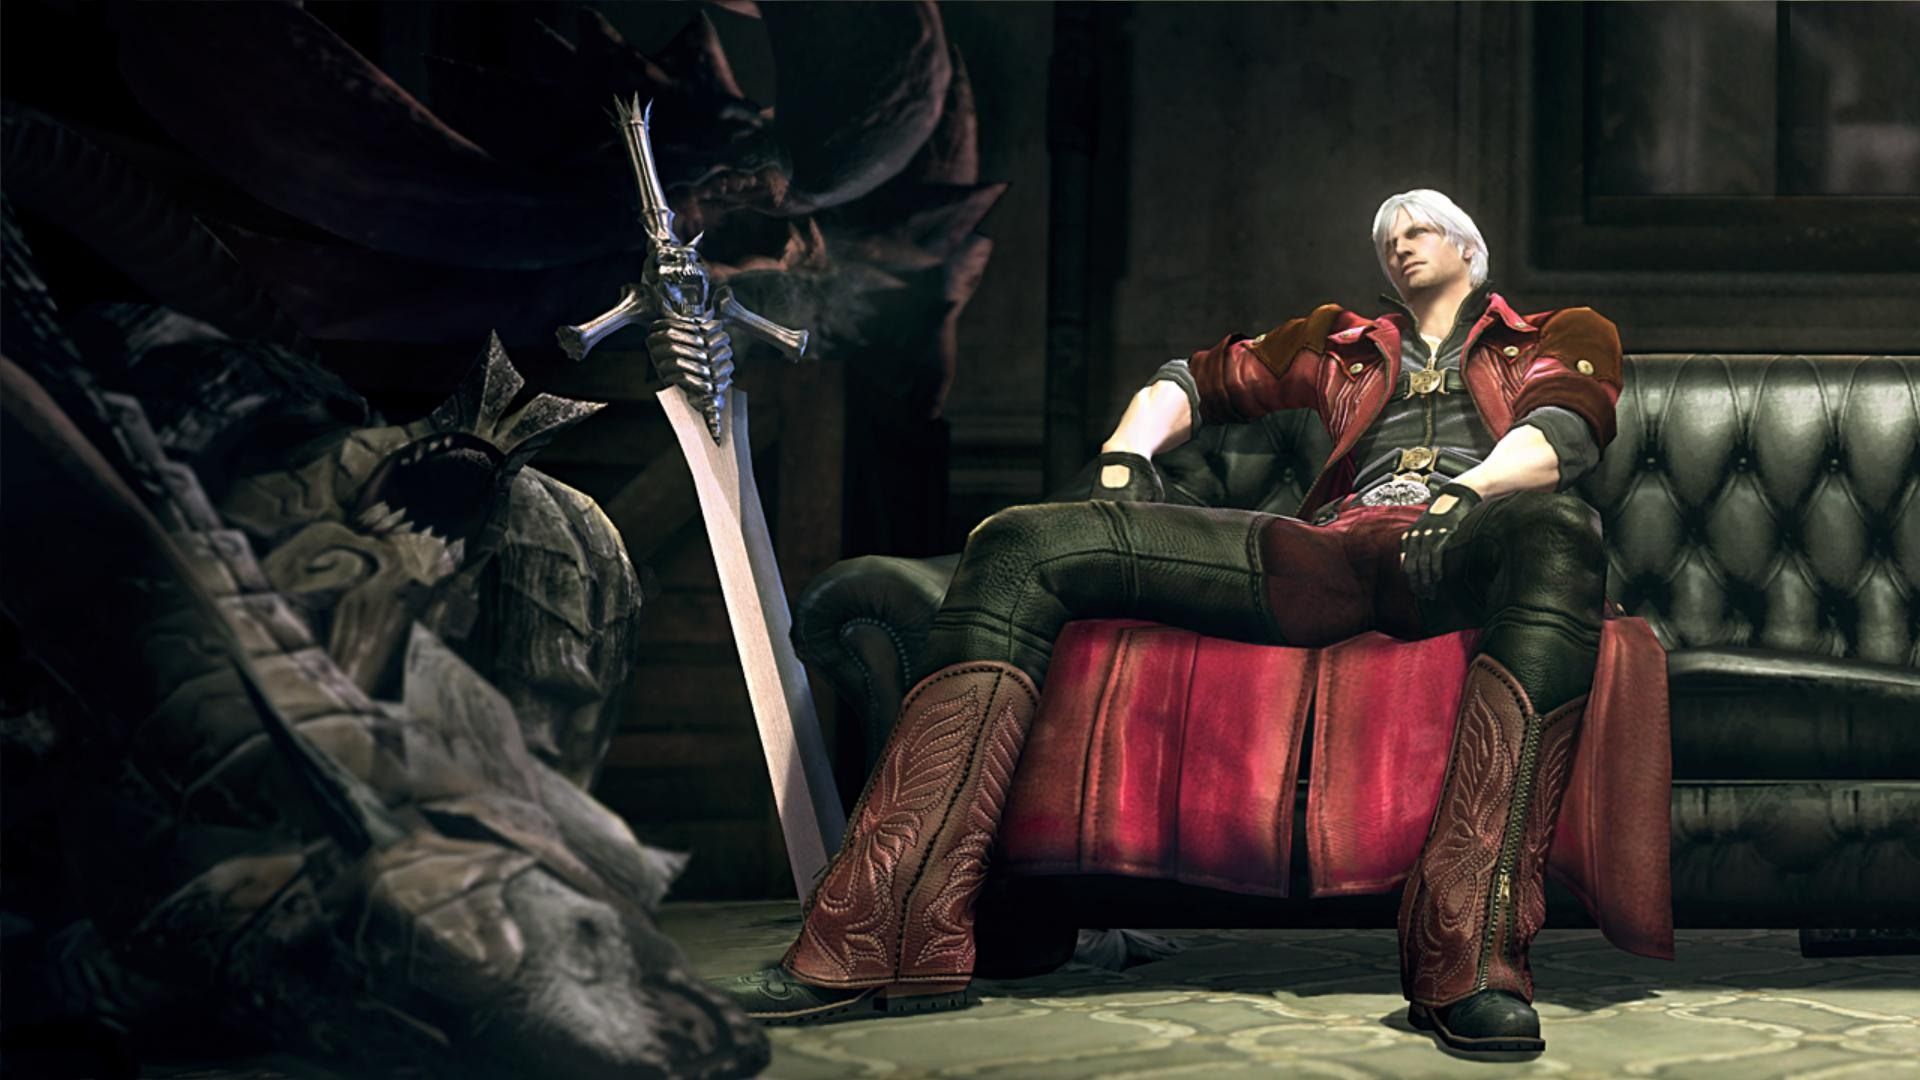 Devil May Cry 5 Wallpaper Background | HD Wallpapers